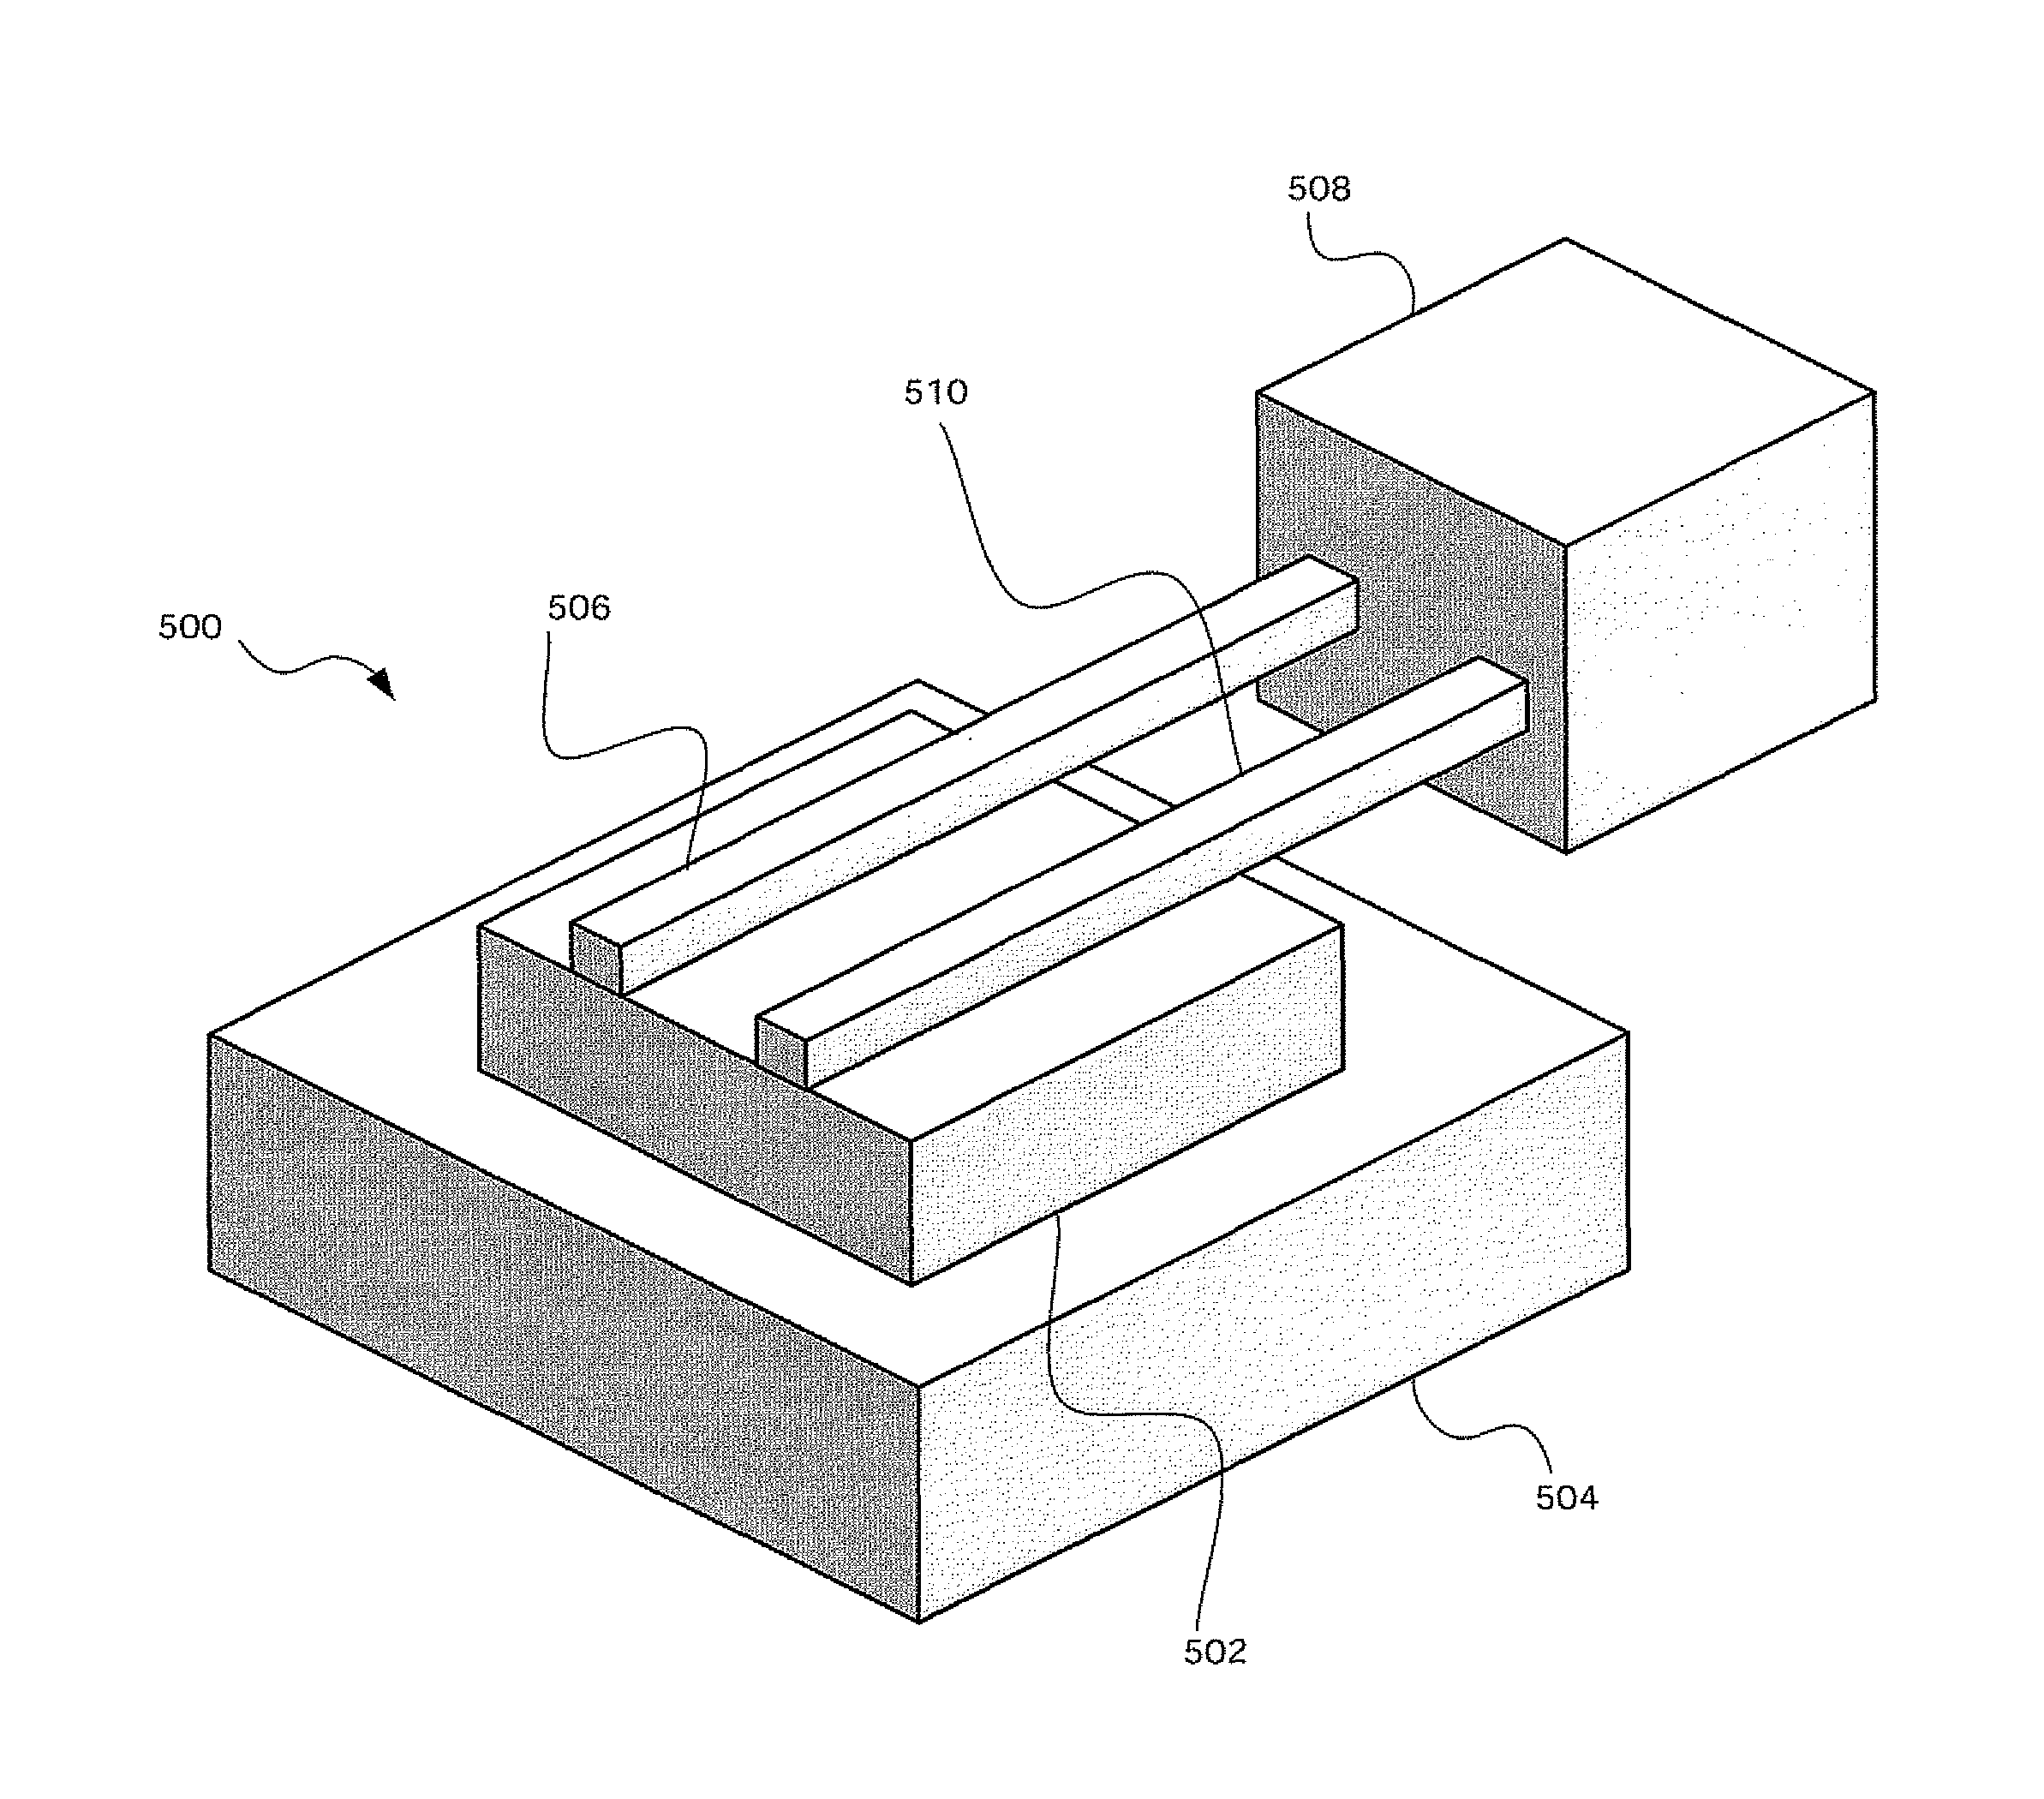 Hybrid layers for use in coatings on electronic devices or other articles